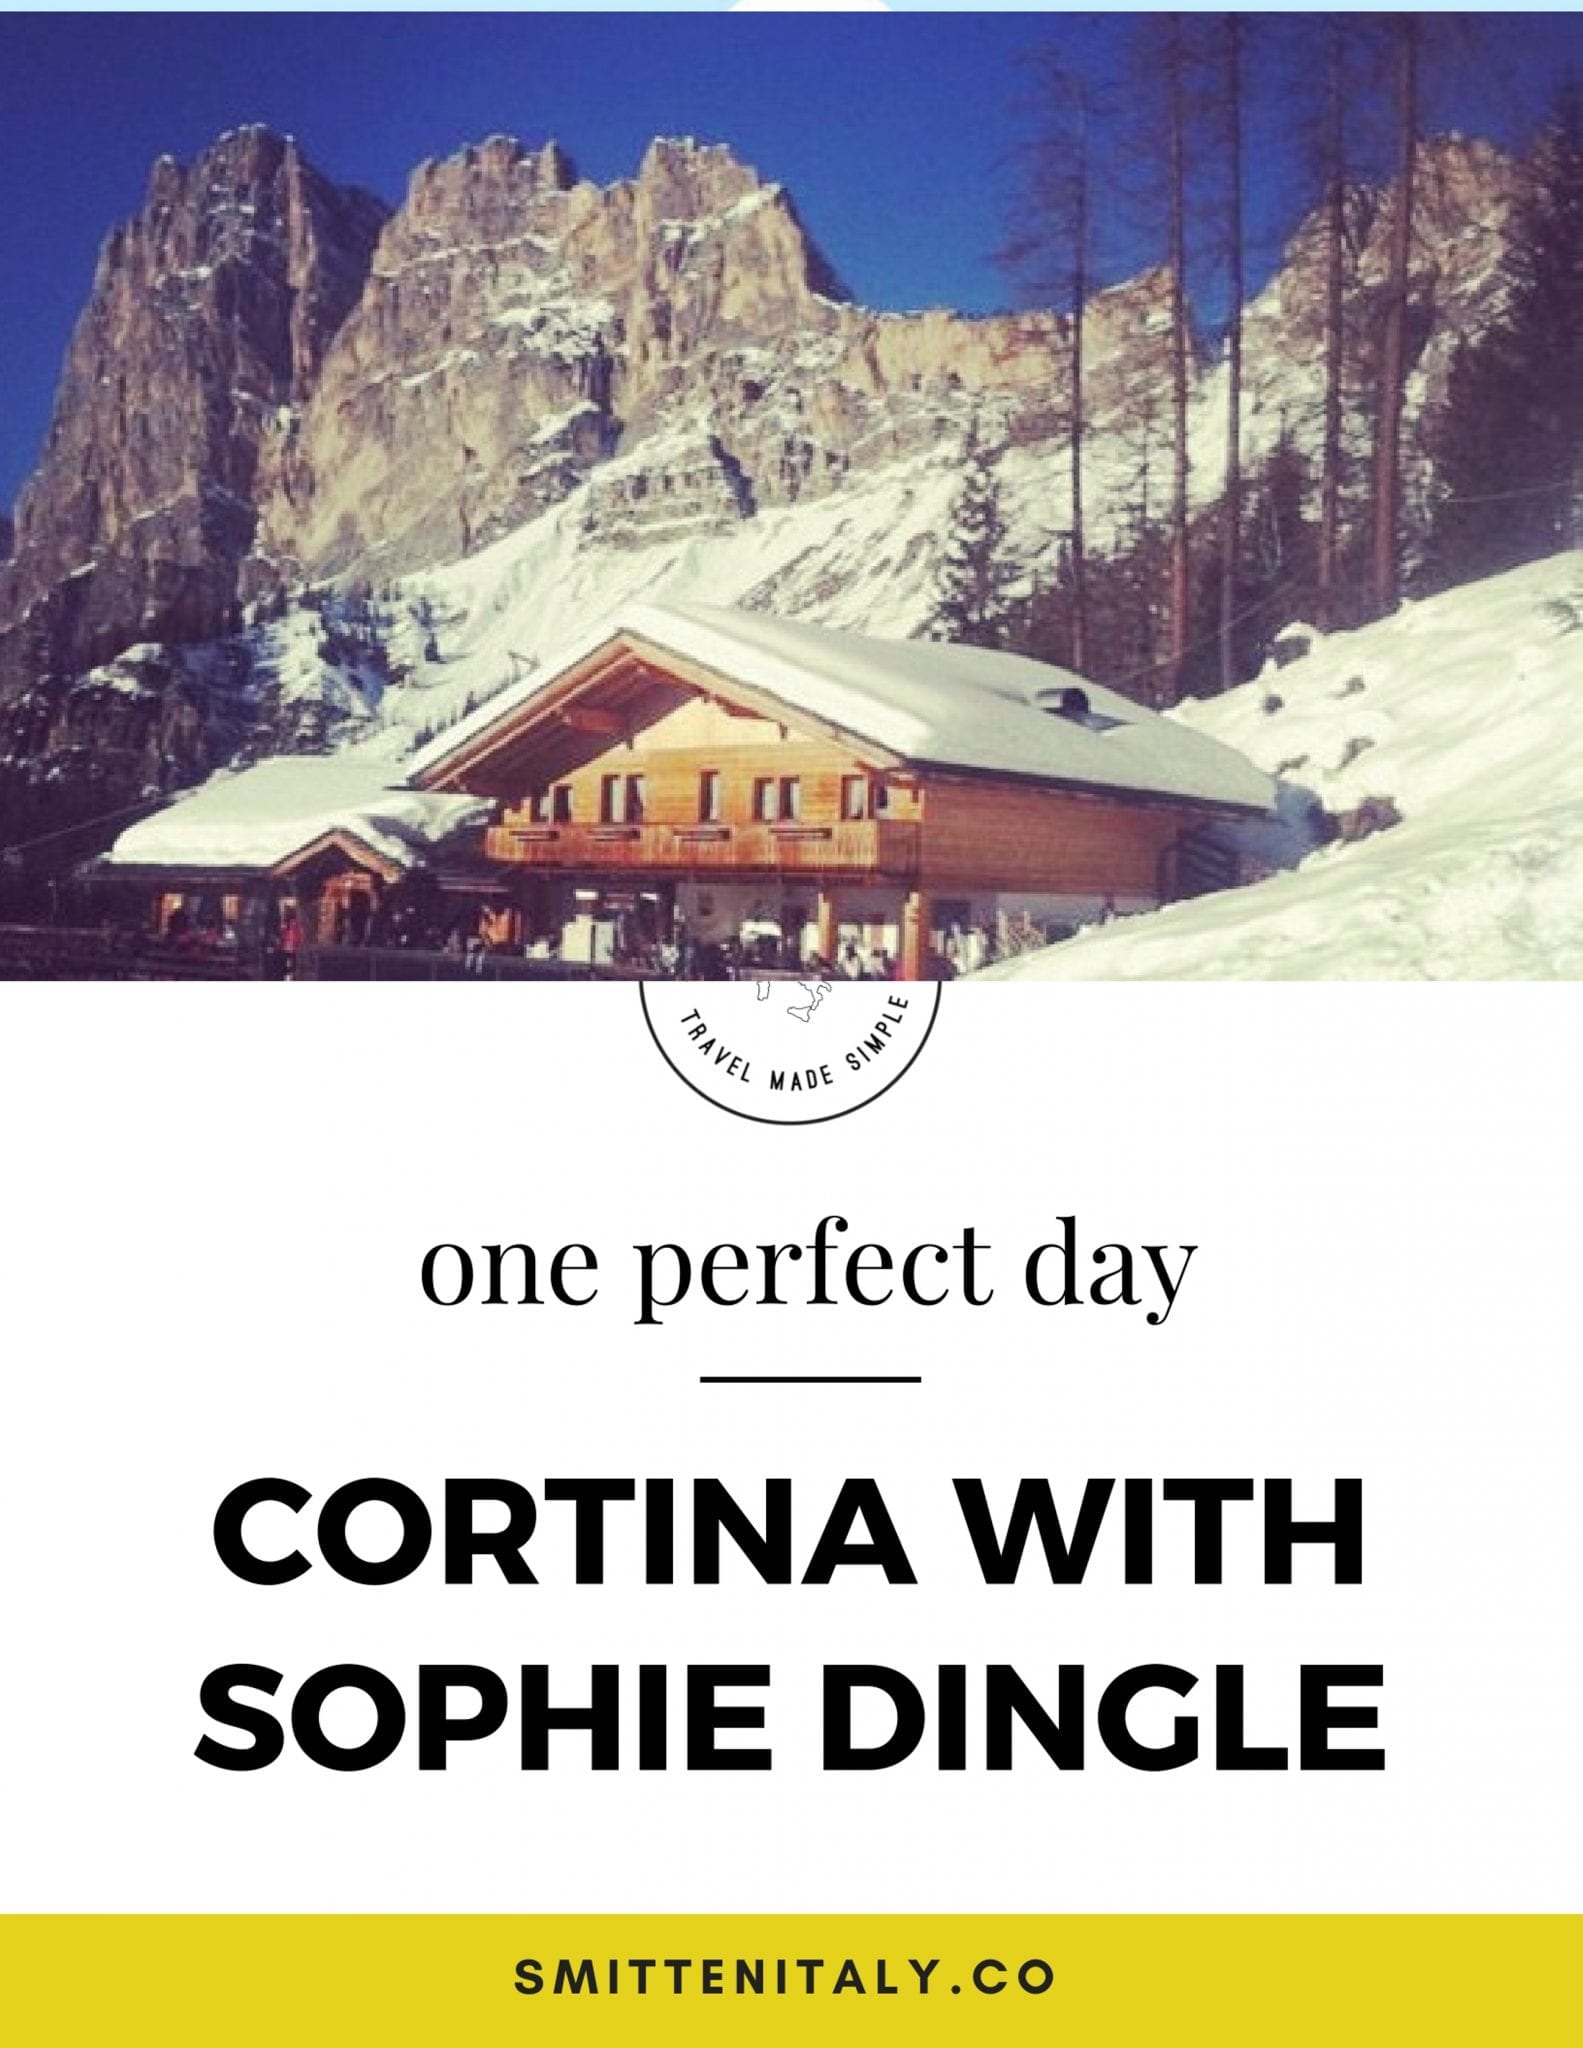 One Perfect Day Travel Guides: Cortina, Italy with Sophie Dingle